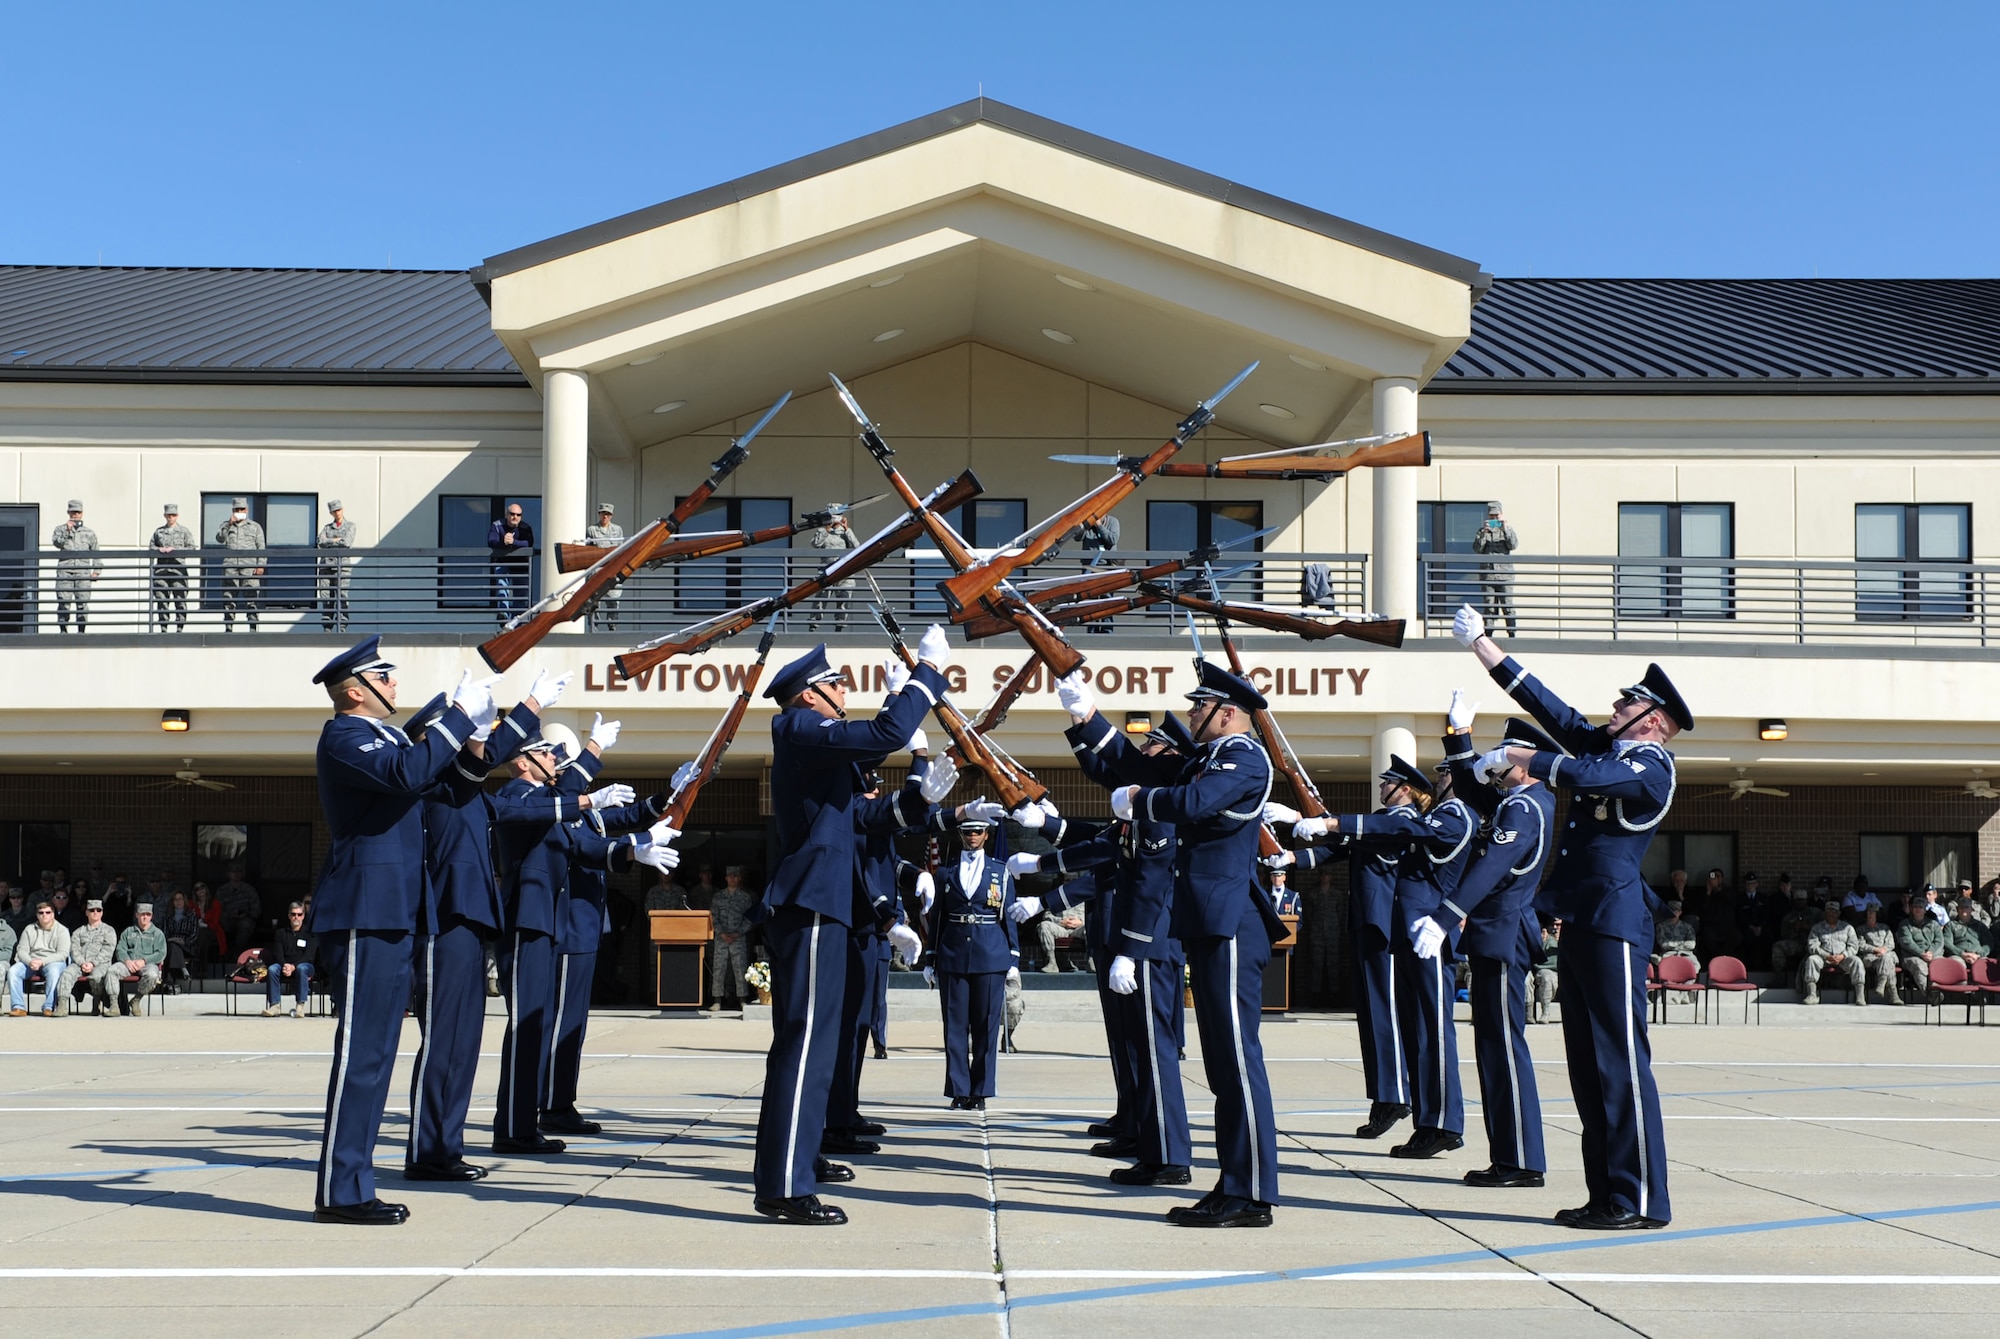 The U.S. Air Force Honor Guard Drill Team performs a new routine on the Levitow Training Support Facility drill pad Feb. 26, 2016, Keesler Air Force Base, Miss. During the past month, the team developed the routine to be used throughout the year. (U.S. Air Force photo by Kemberly Groue)